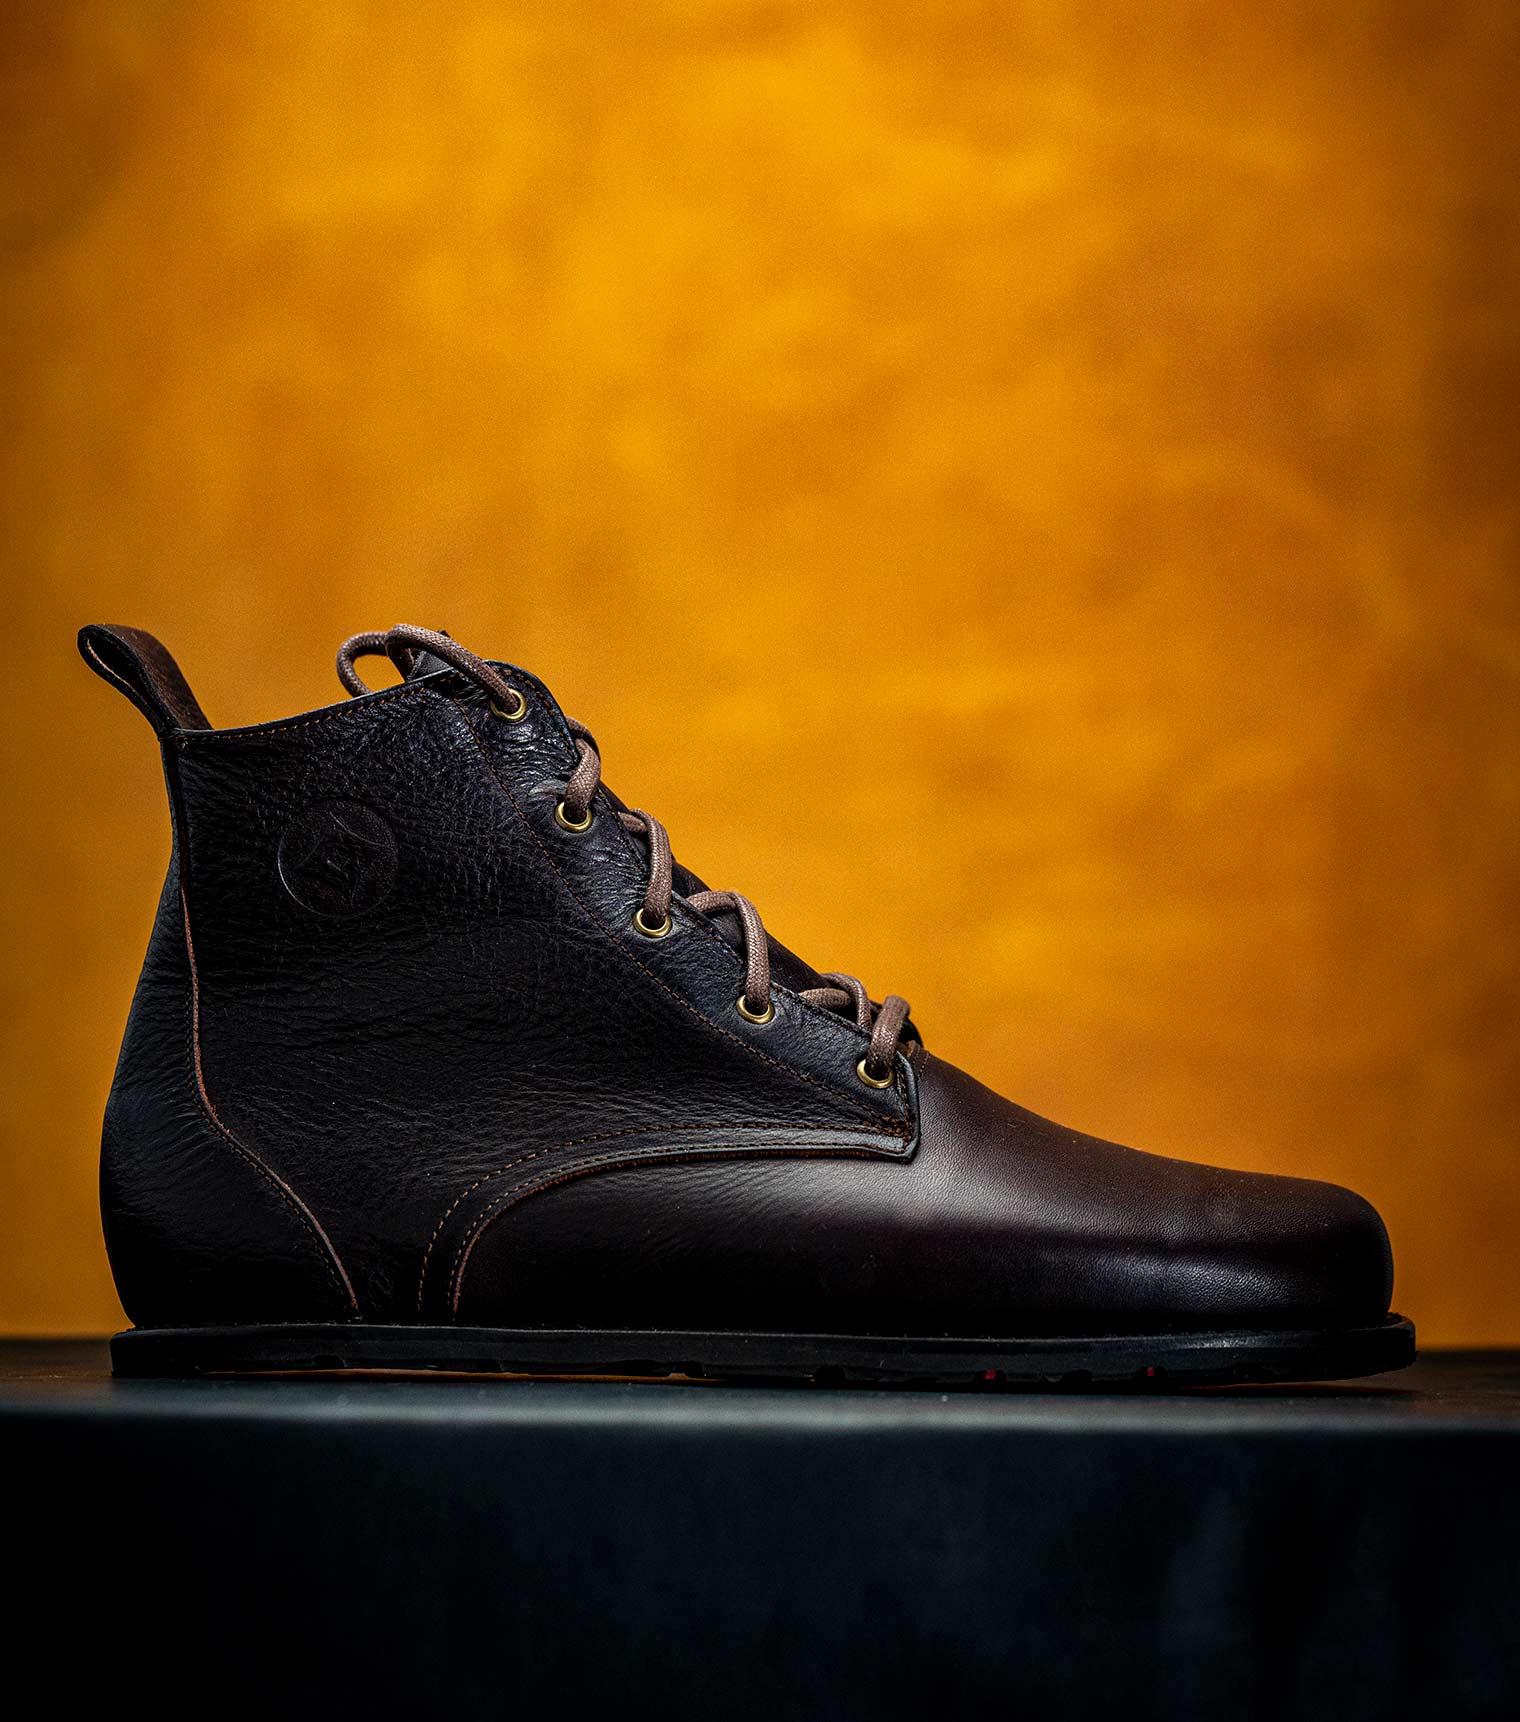 Goodyear Welted Barefoot Chukka Boots in Brown by Gaucho Ninja